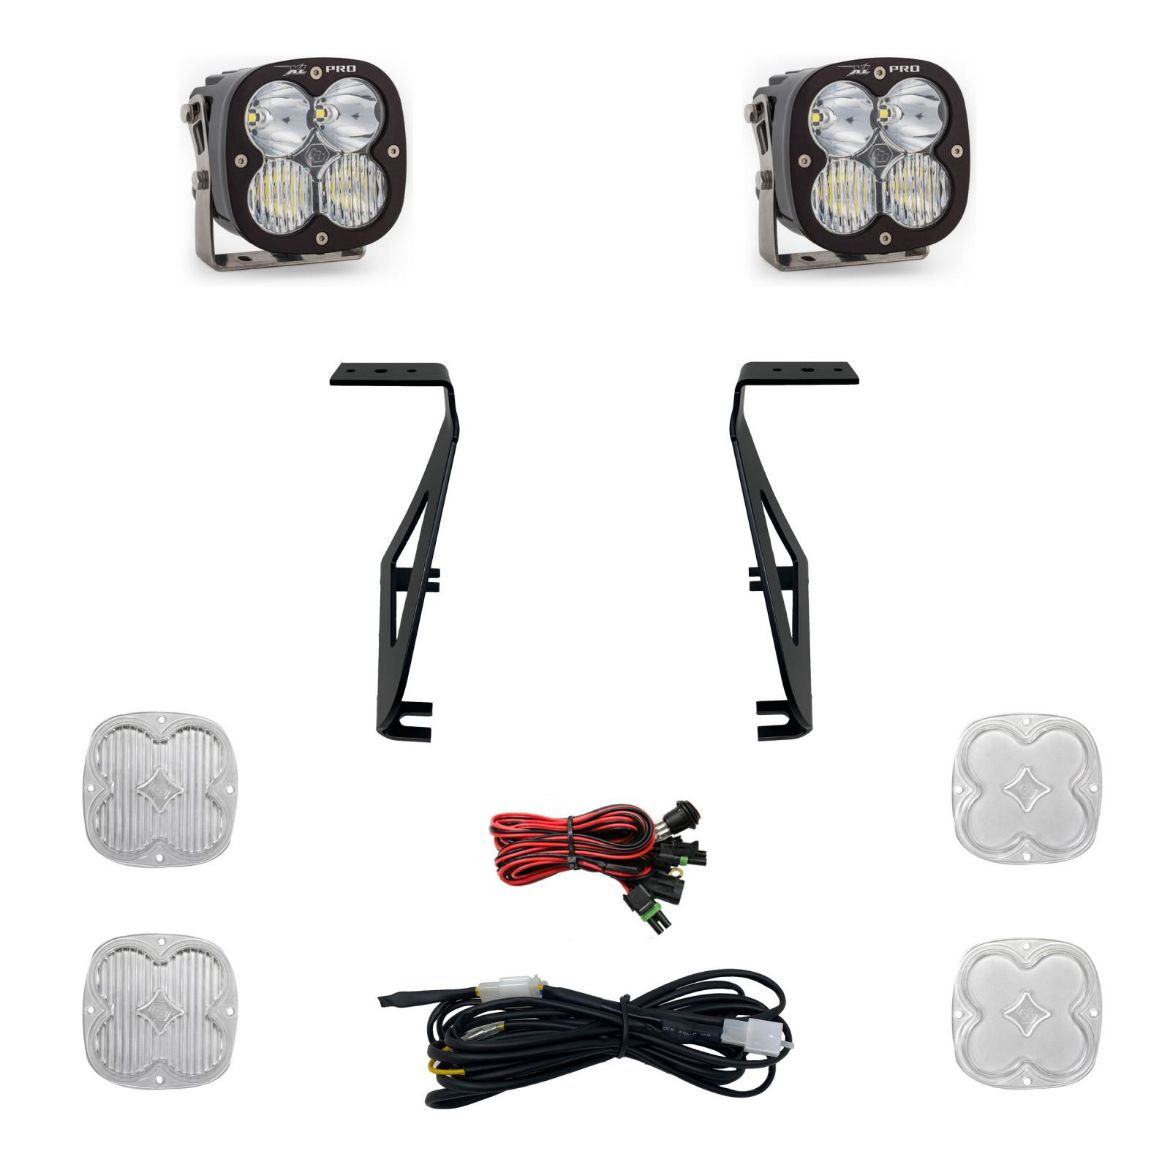 Picture of XL Pro A-Pillar Kit fits 21-On Ford Raptor Baja Designs